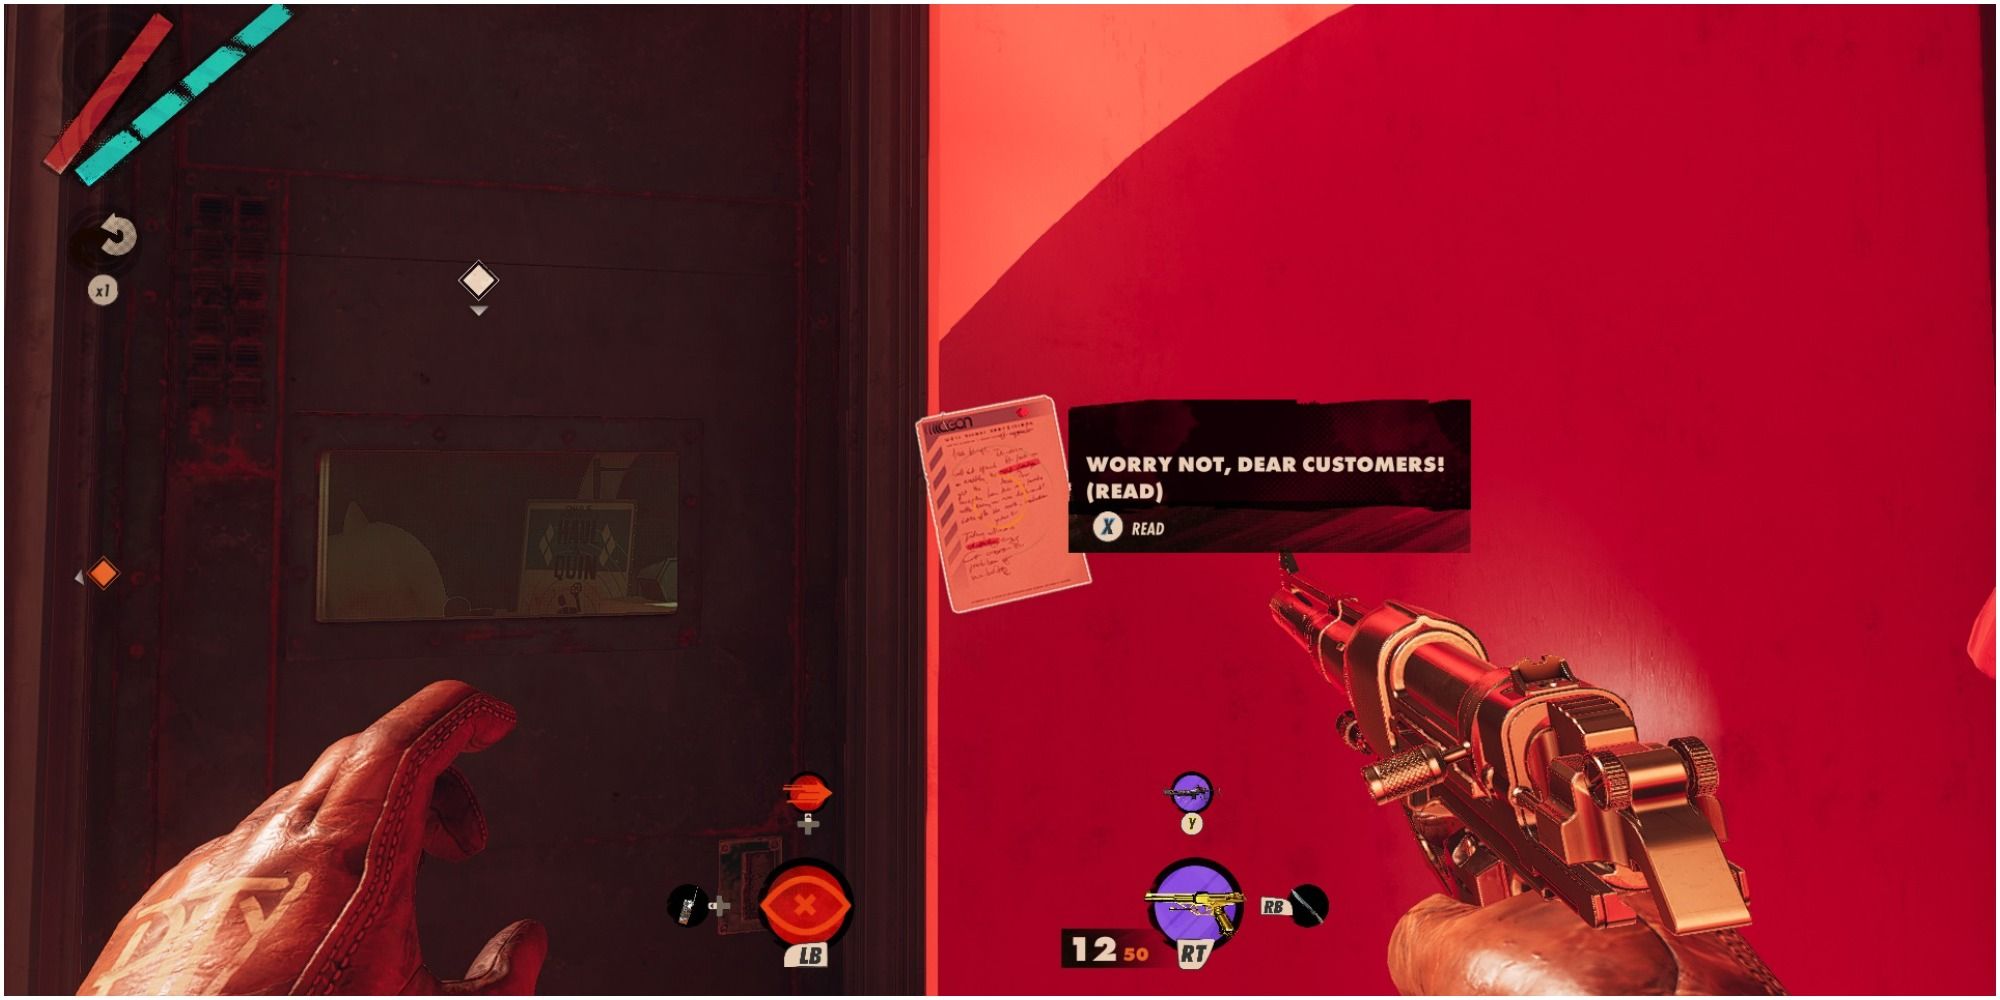 Deathloop Note On The Entrance To Amador's Shop